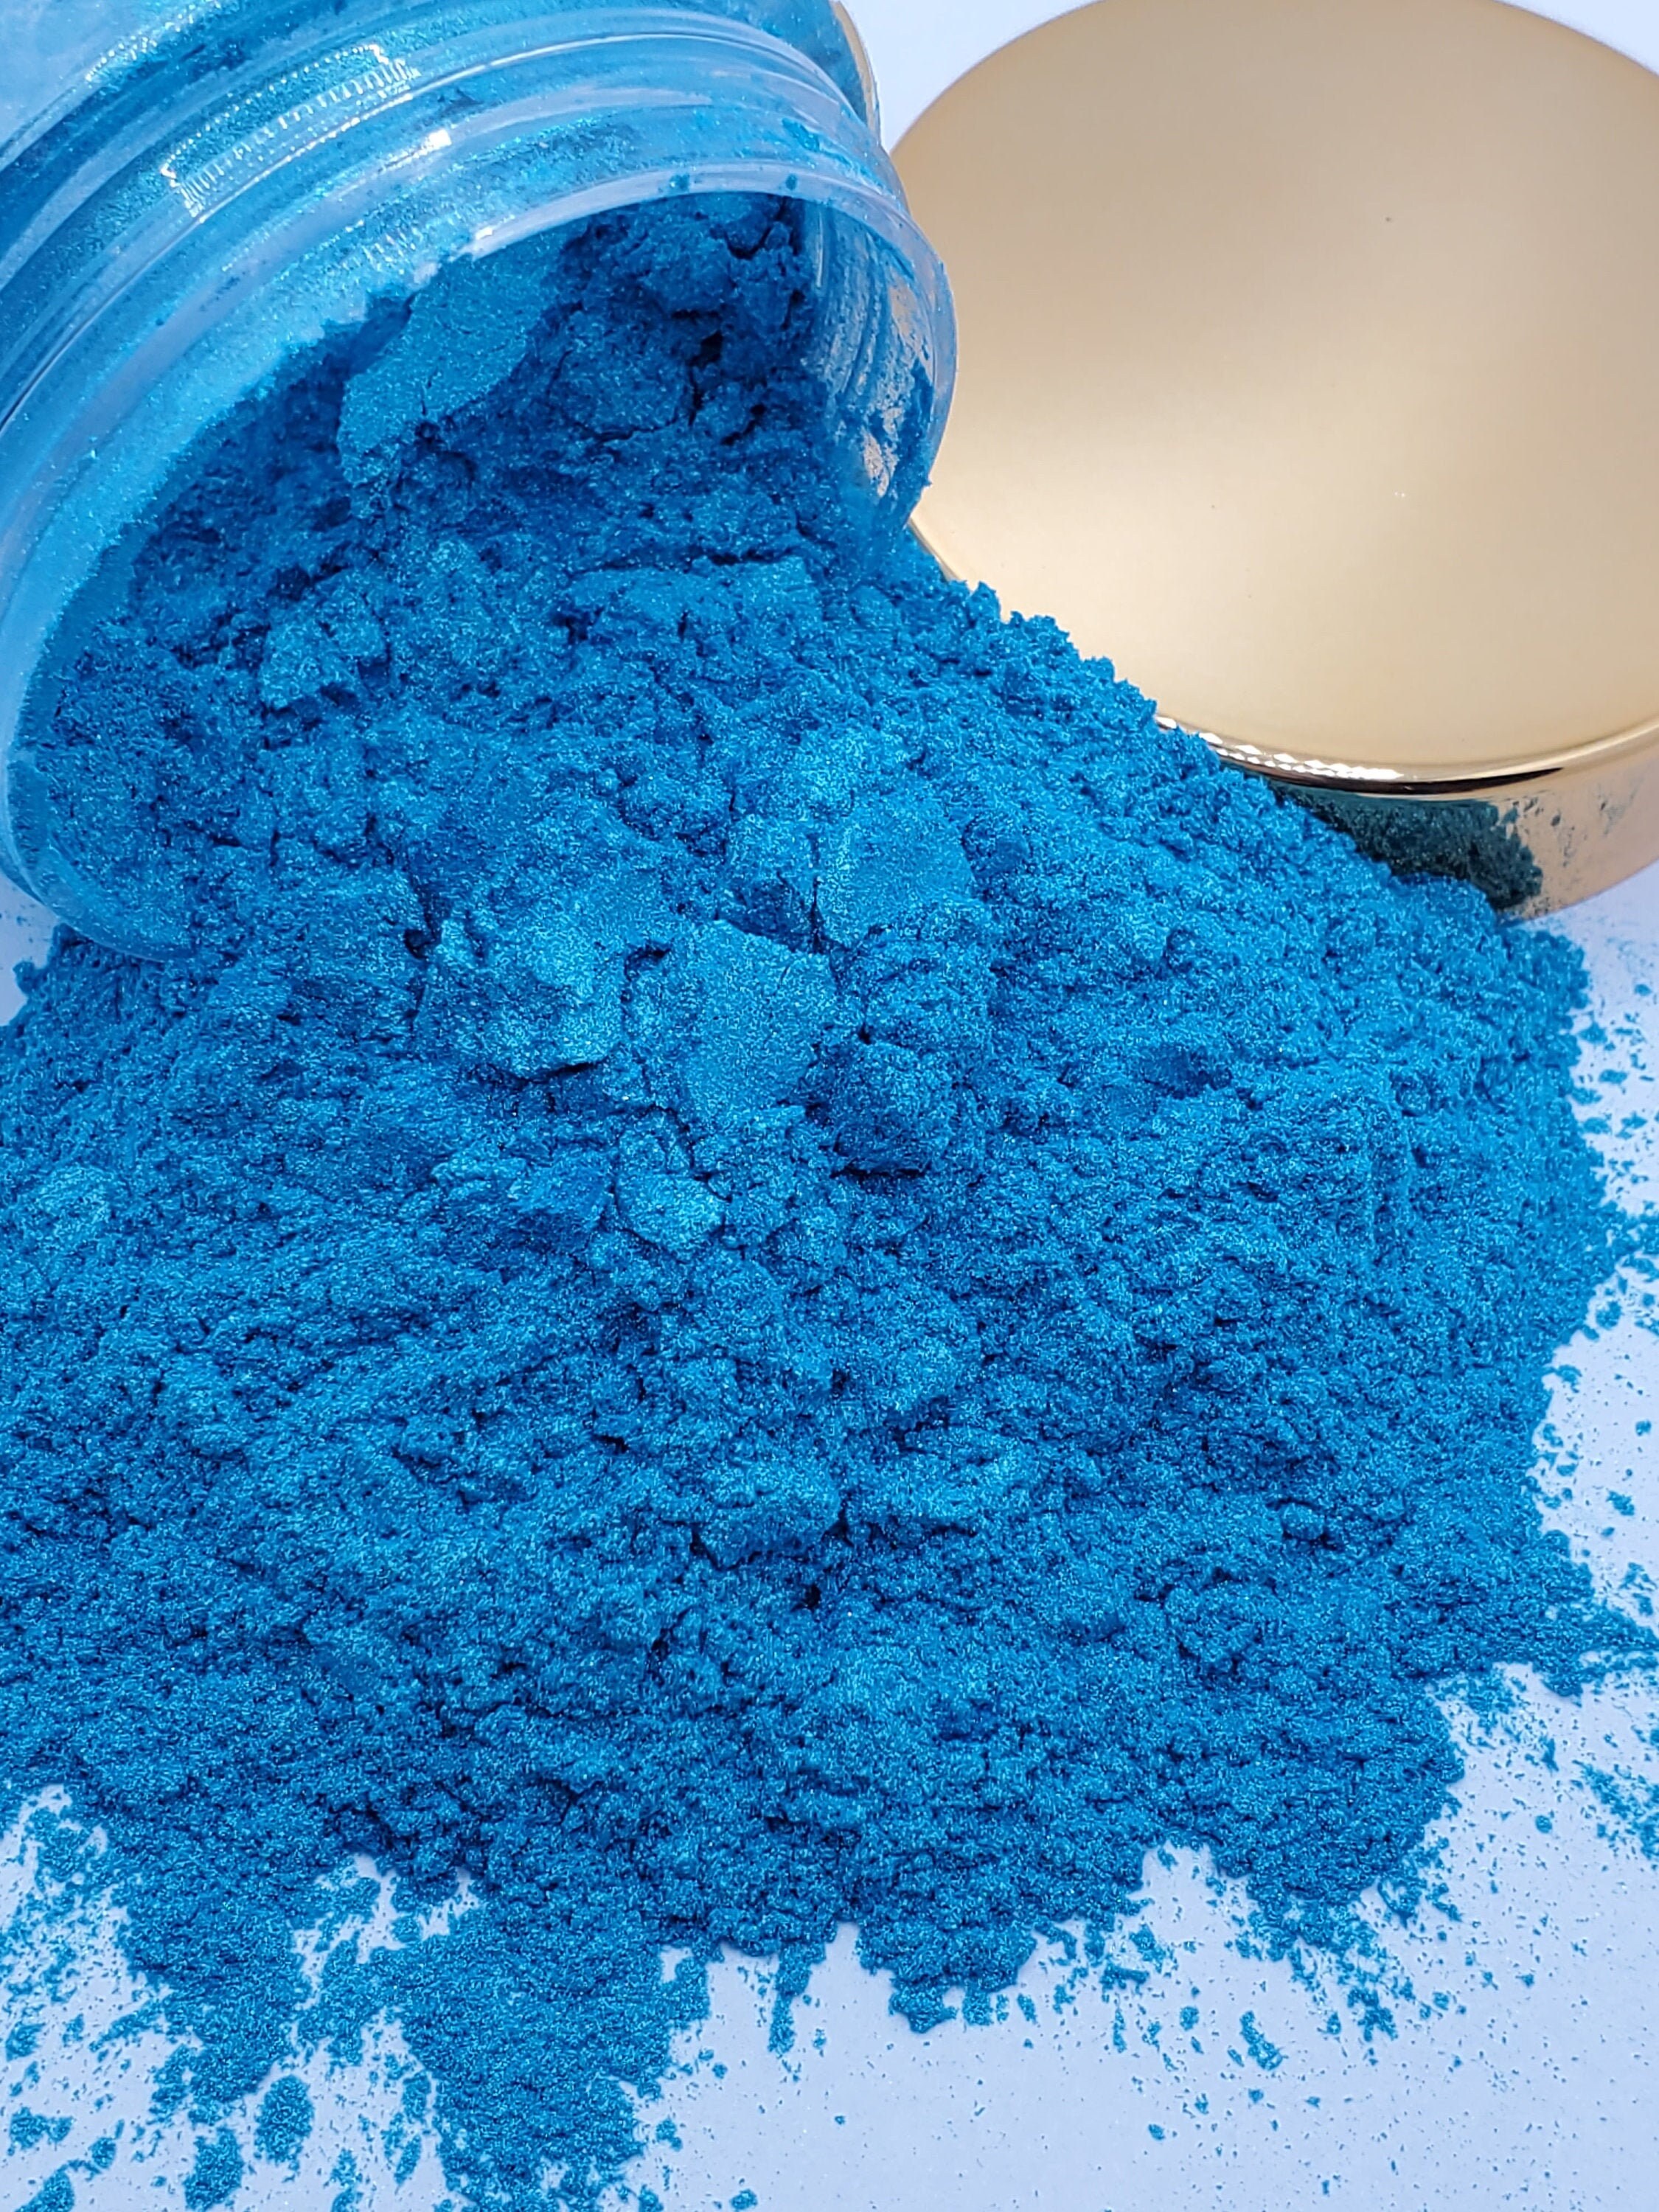 ROLIO Mica Powder Bleu Du France 50g - For Epoxy Resin, Candle, Cosmetic  Making